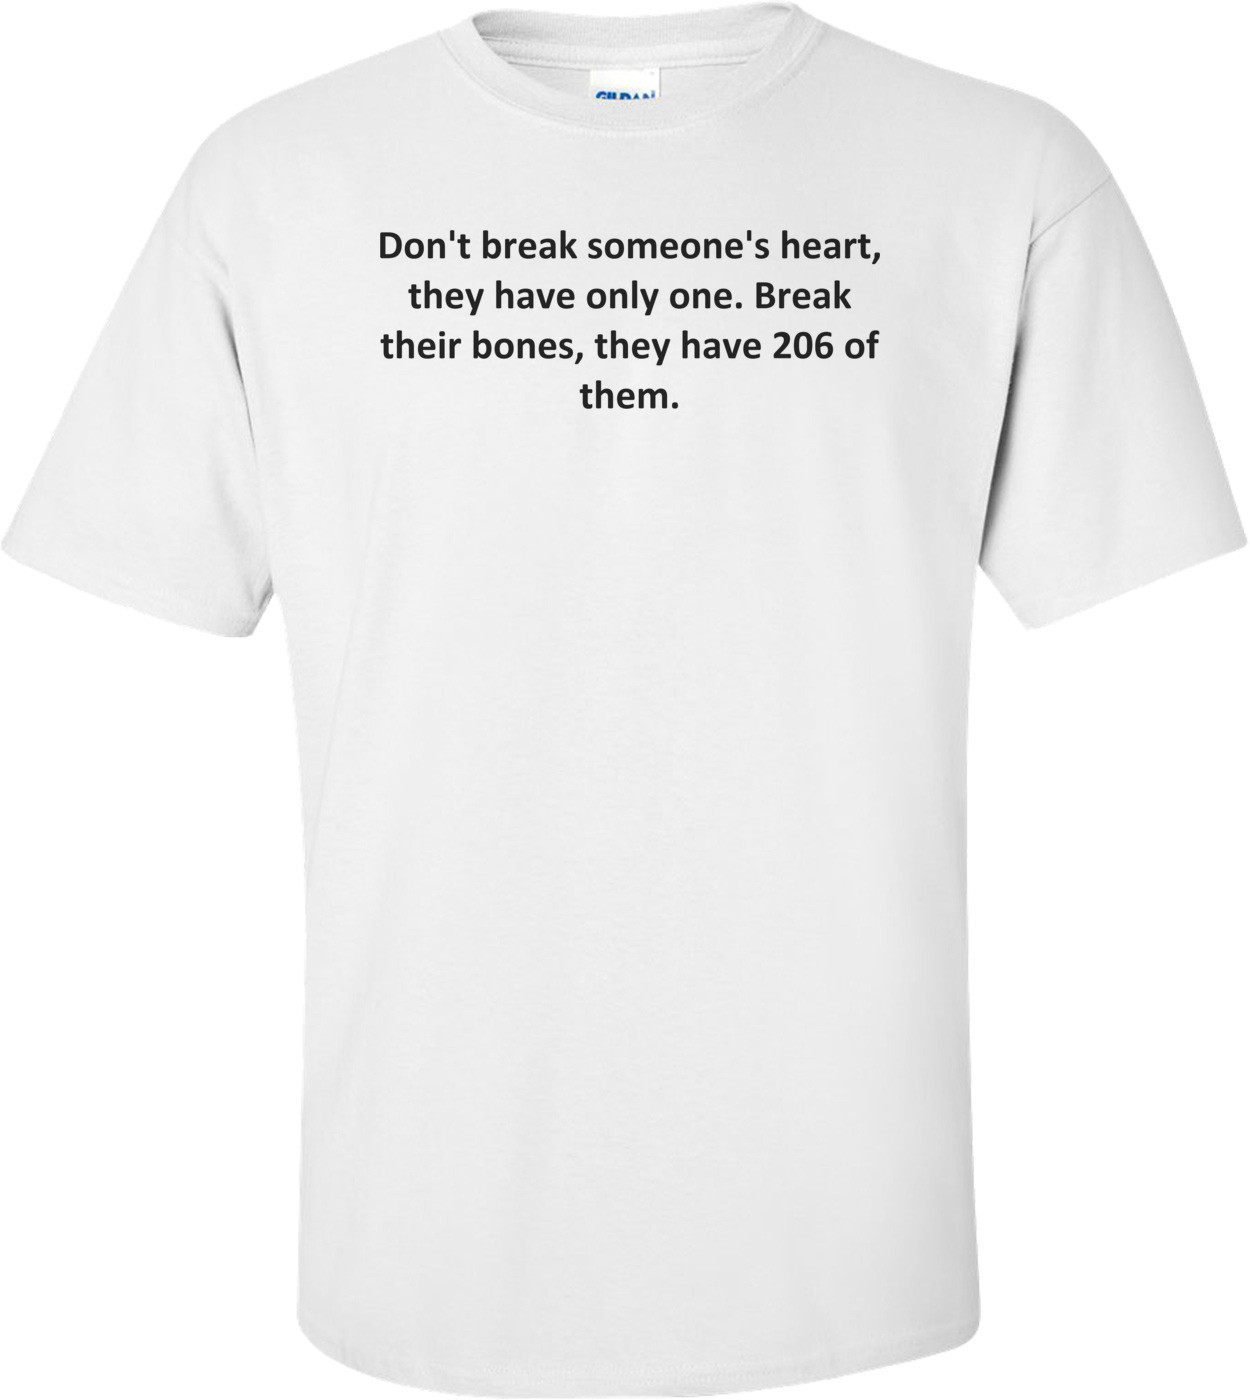 Don't break someone's heart, they have only one. Break their bones, they have 206 of them. Shirt